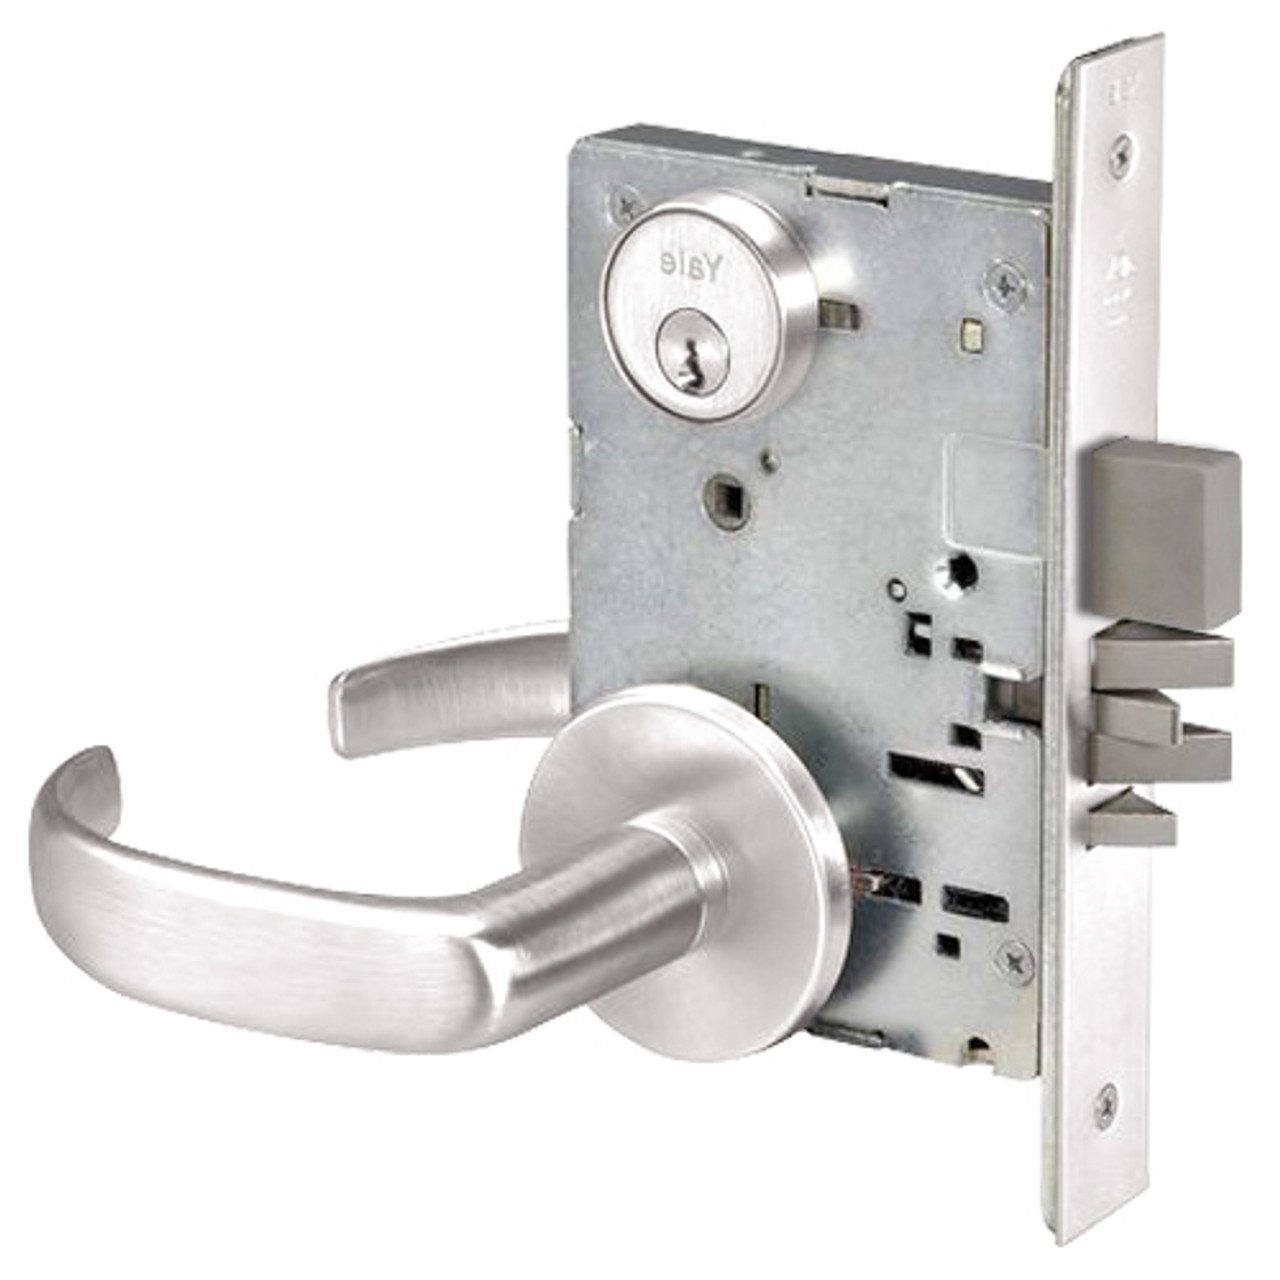 PBR8811-2FL-629 Yale 8800FL Series Double Cylinder Mortise Classroom Deadbolt Locks with Pacific Beach Lever in Bright Stainless Steel